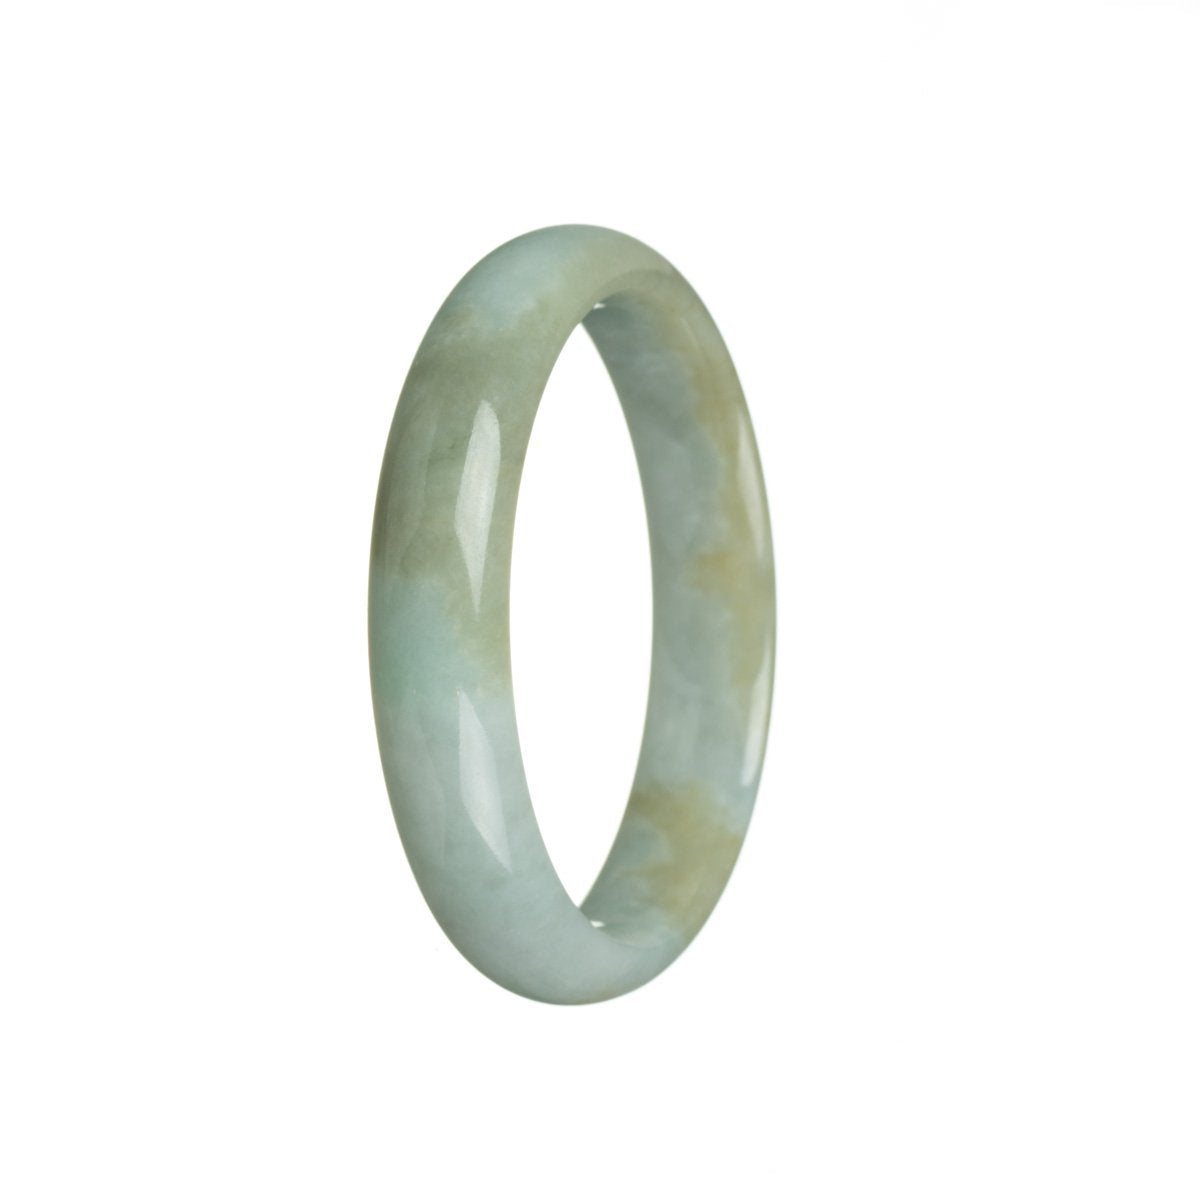 A close-up photo of a light green jadeite jade bangle bracelet with a half moon shape, measuring 56mm. This bracelet is certified as untreated, showcasing its natural beauty. Perfect for adding a touch of elegance to any outfit.